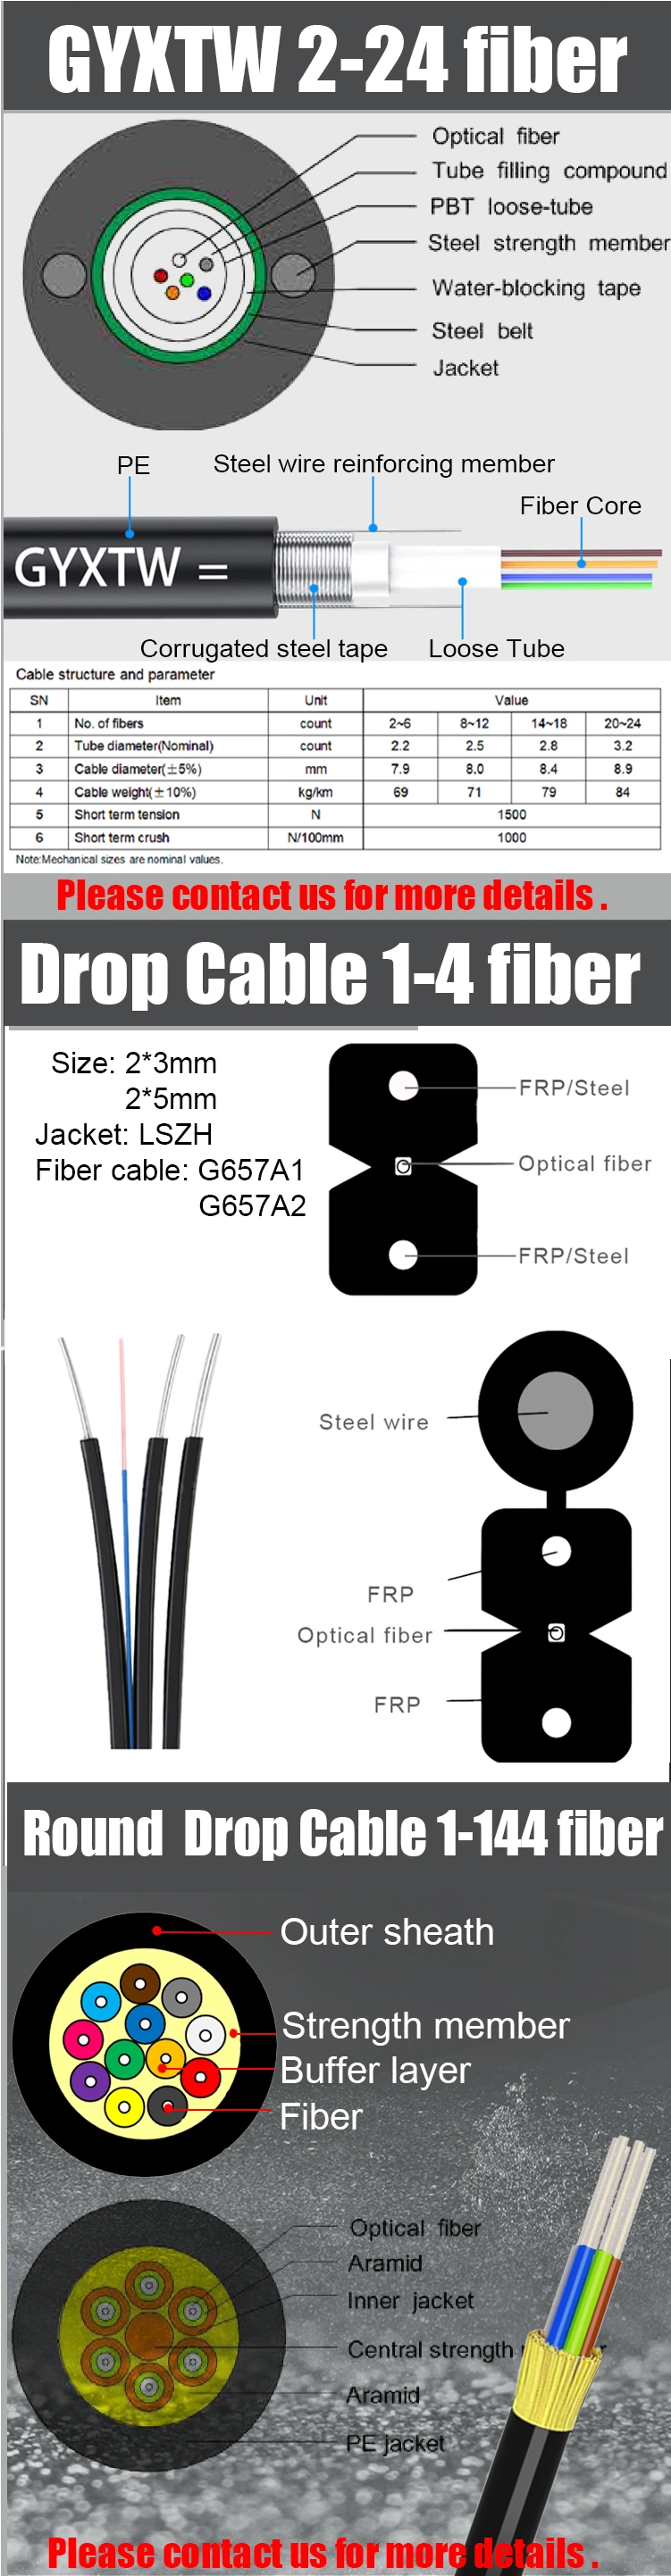 Gcabling Drop Cable with FRP Messenger Fiber Optic Outdoor Cable in GYTS GYXTW ADSS